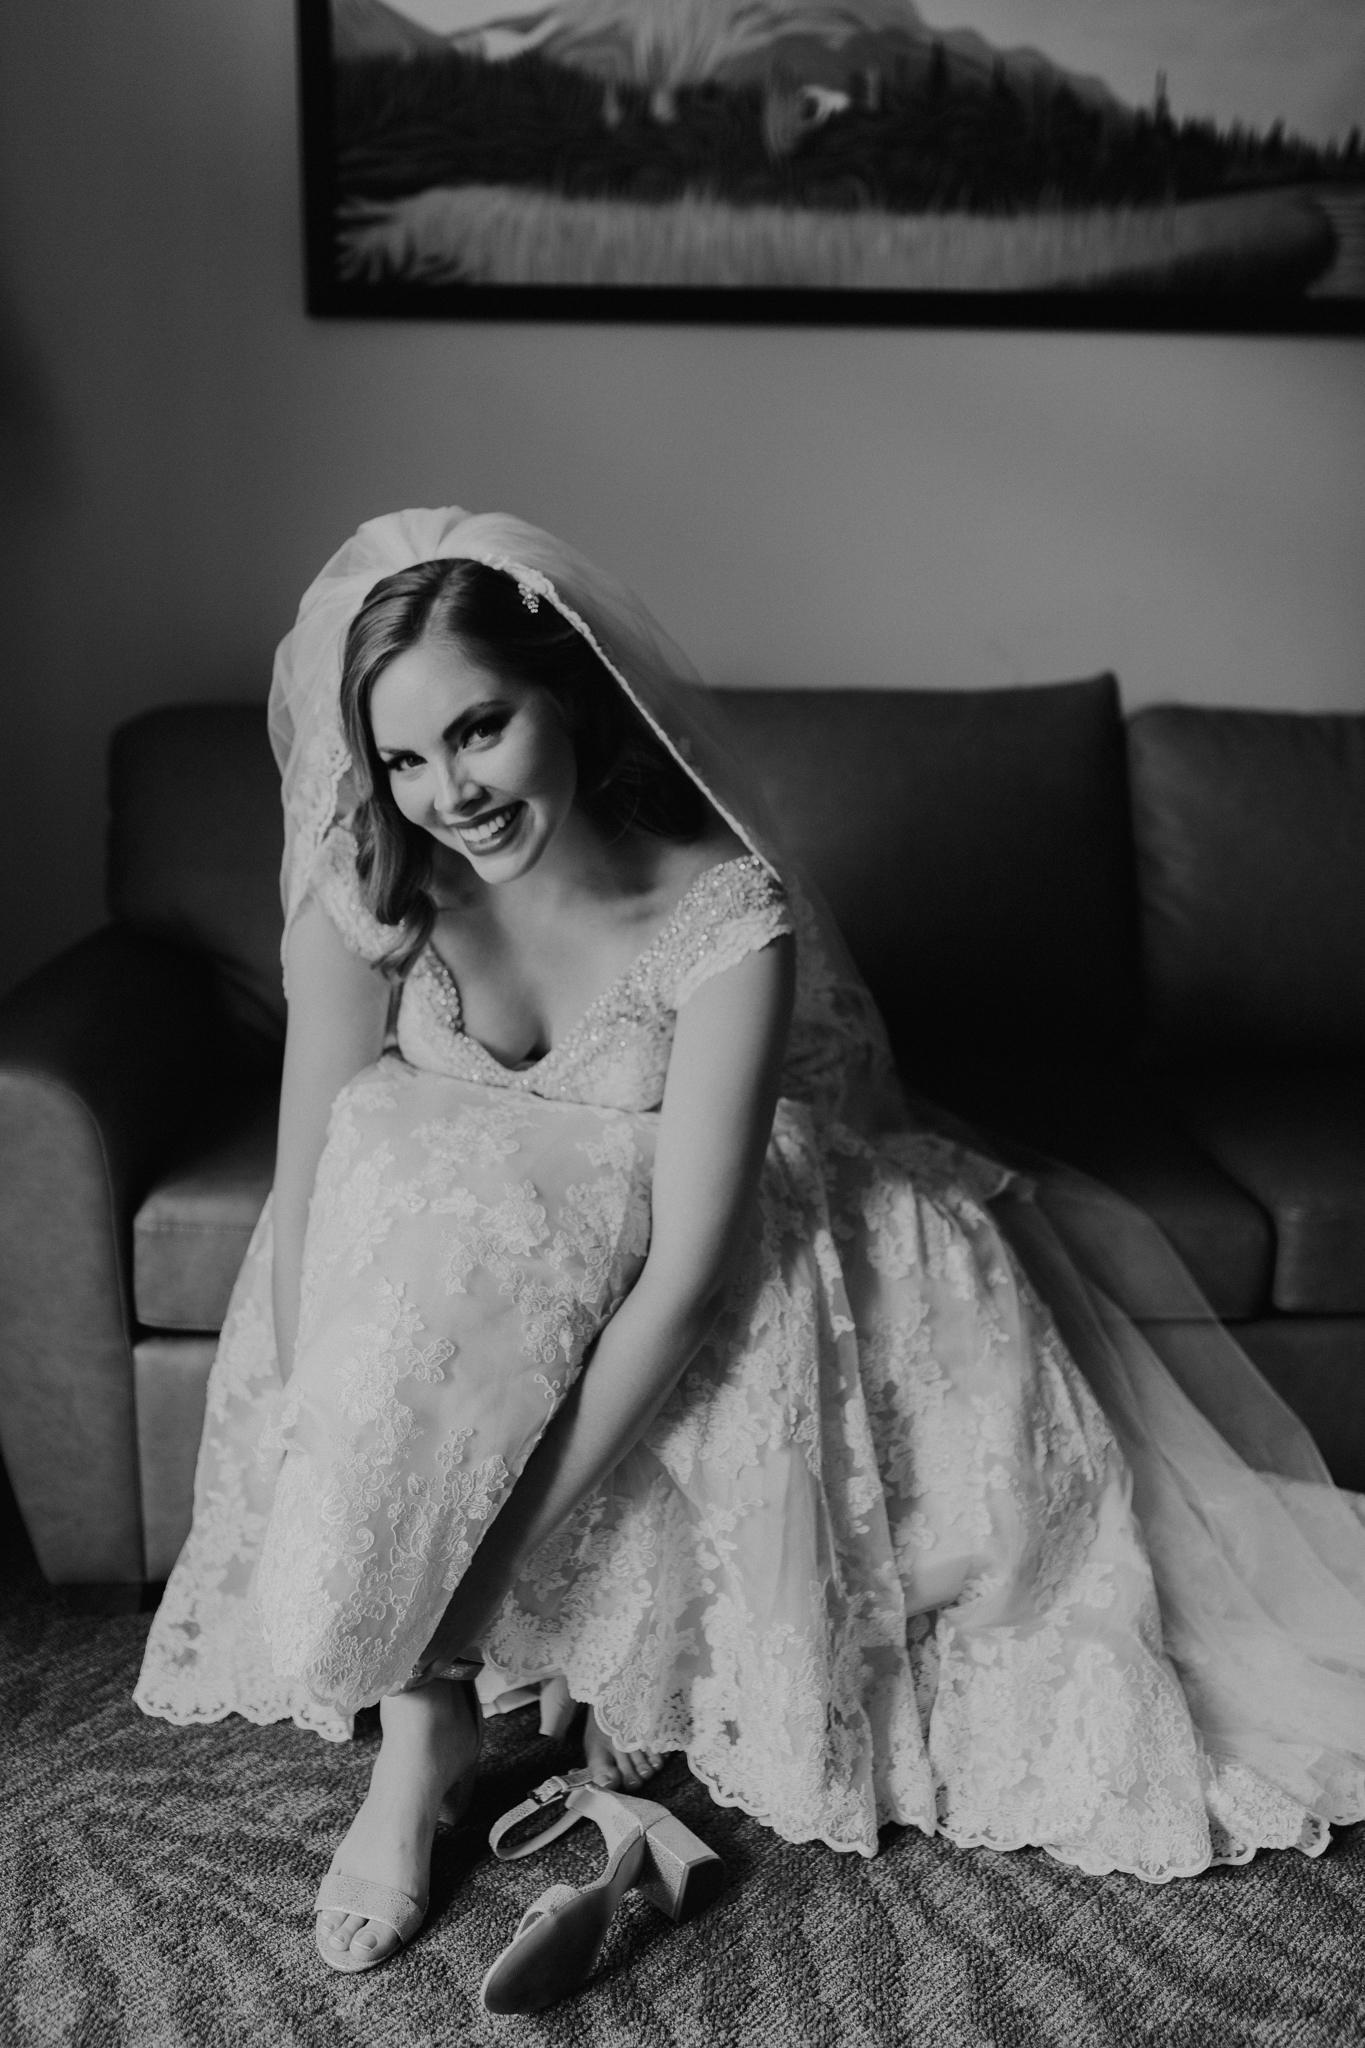 Bride sitting on couch putting on shoes at destination wedding in Canmore Alberta